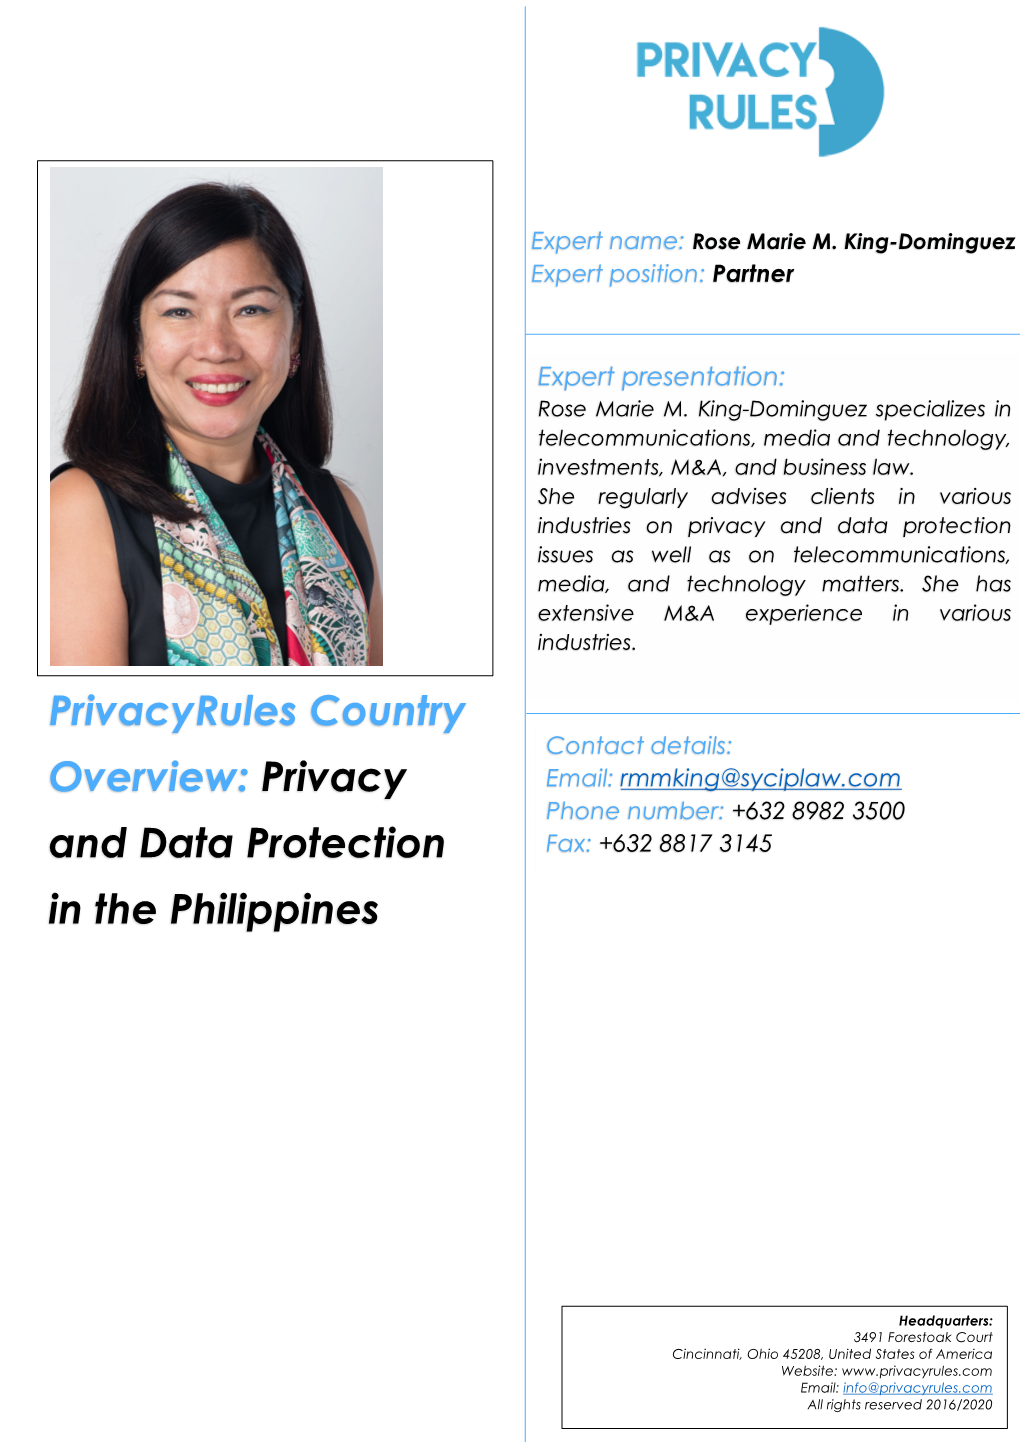 Privacyrules Country Overview: Privacy and Data Protection in The